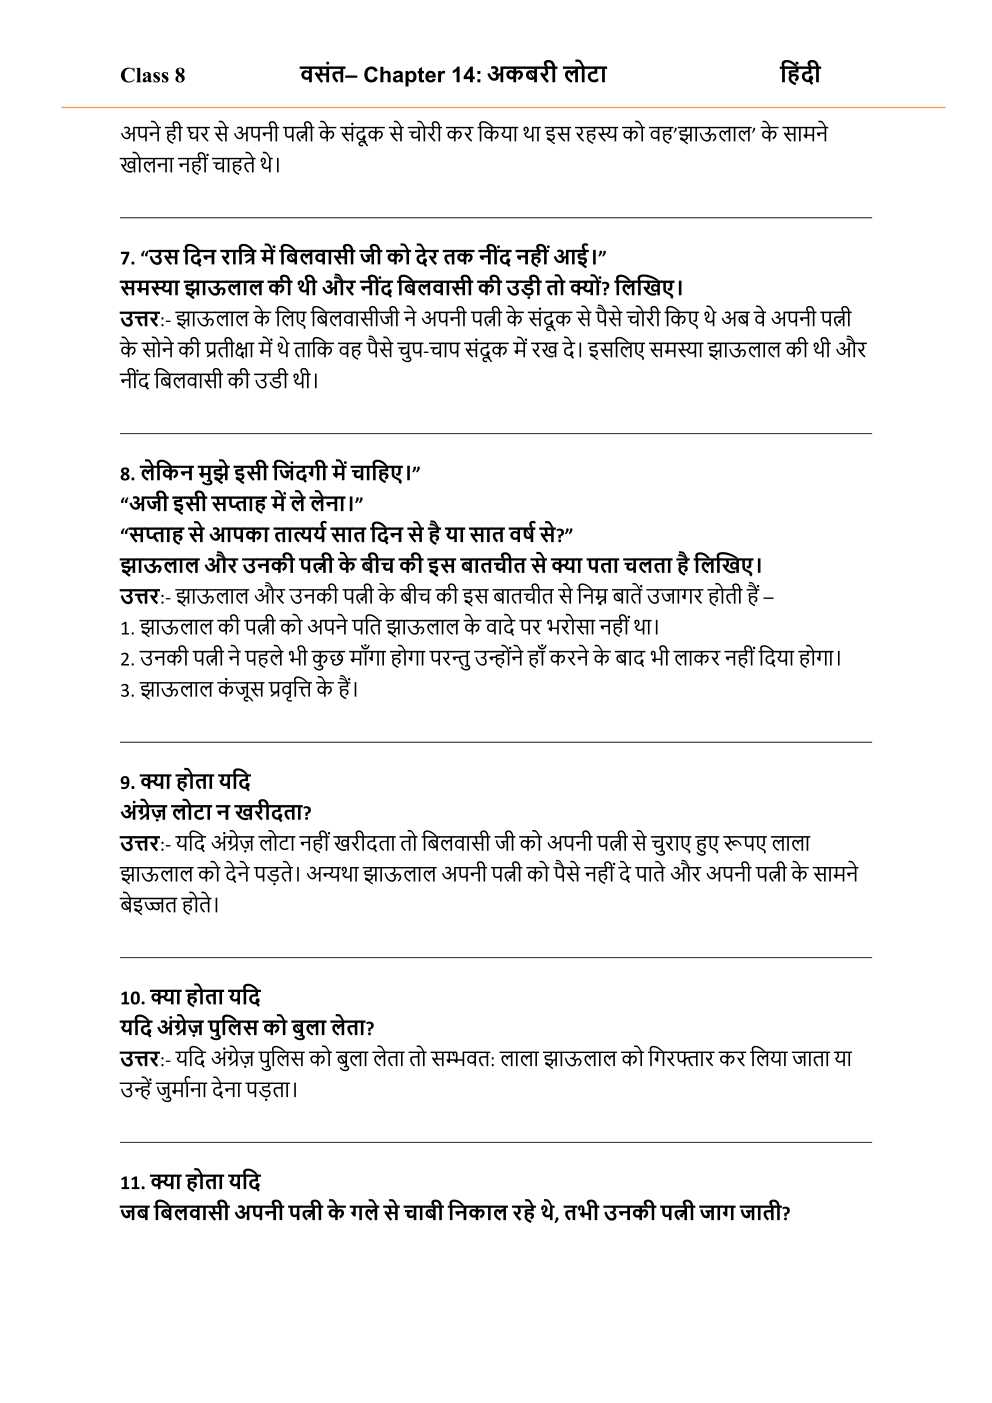 NCERT Solutions For Class 8 Hindi Vasant Chapter 14